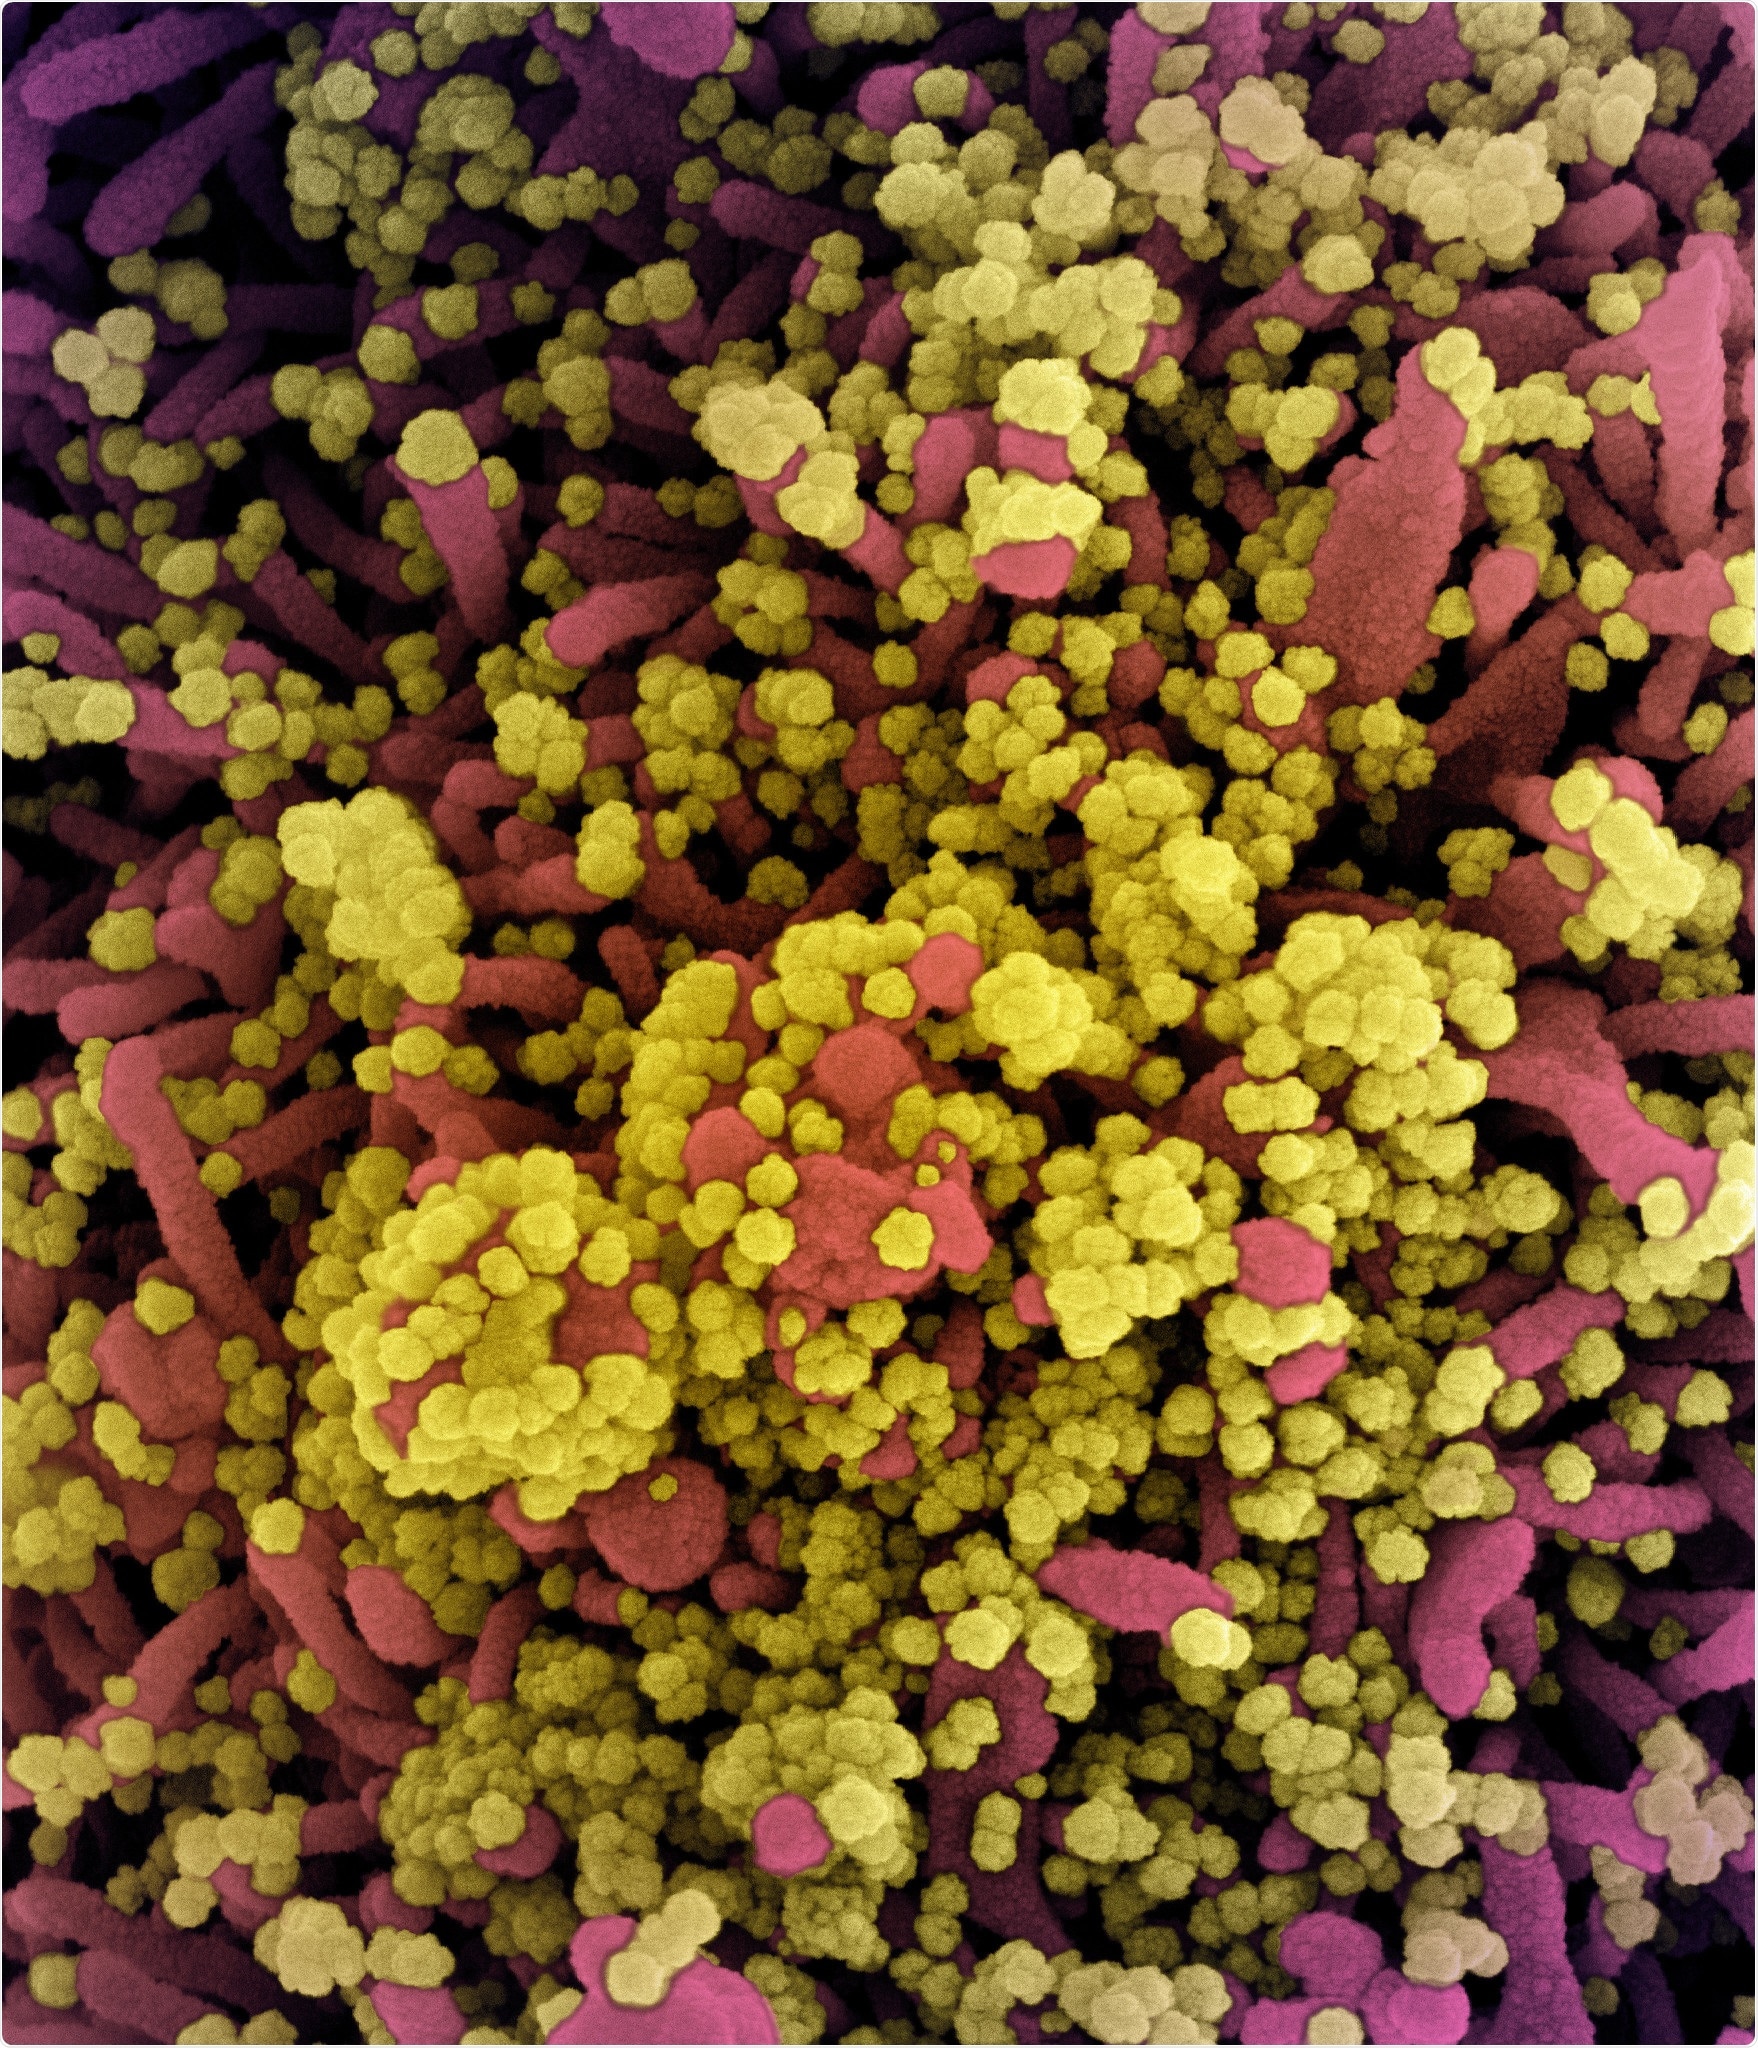 Colorized scanning electron micrograph of a cell heavily infected with SARS-CoV-2 virus particles (yellow), isolated from a patient sample. Image captured at the NIAID Integrated Research Facility (IRF) in Fort Detrick, Maryland. Credit: NIAI